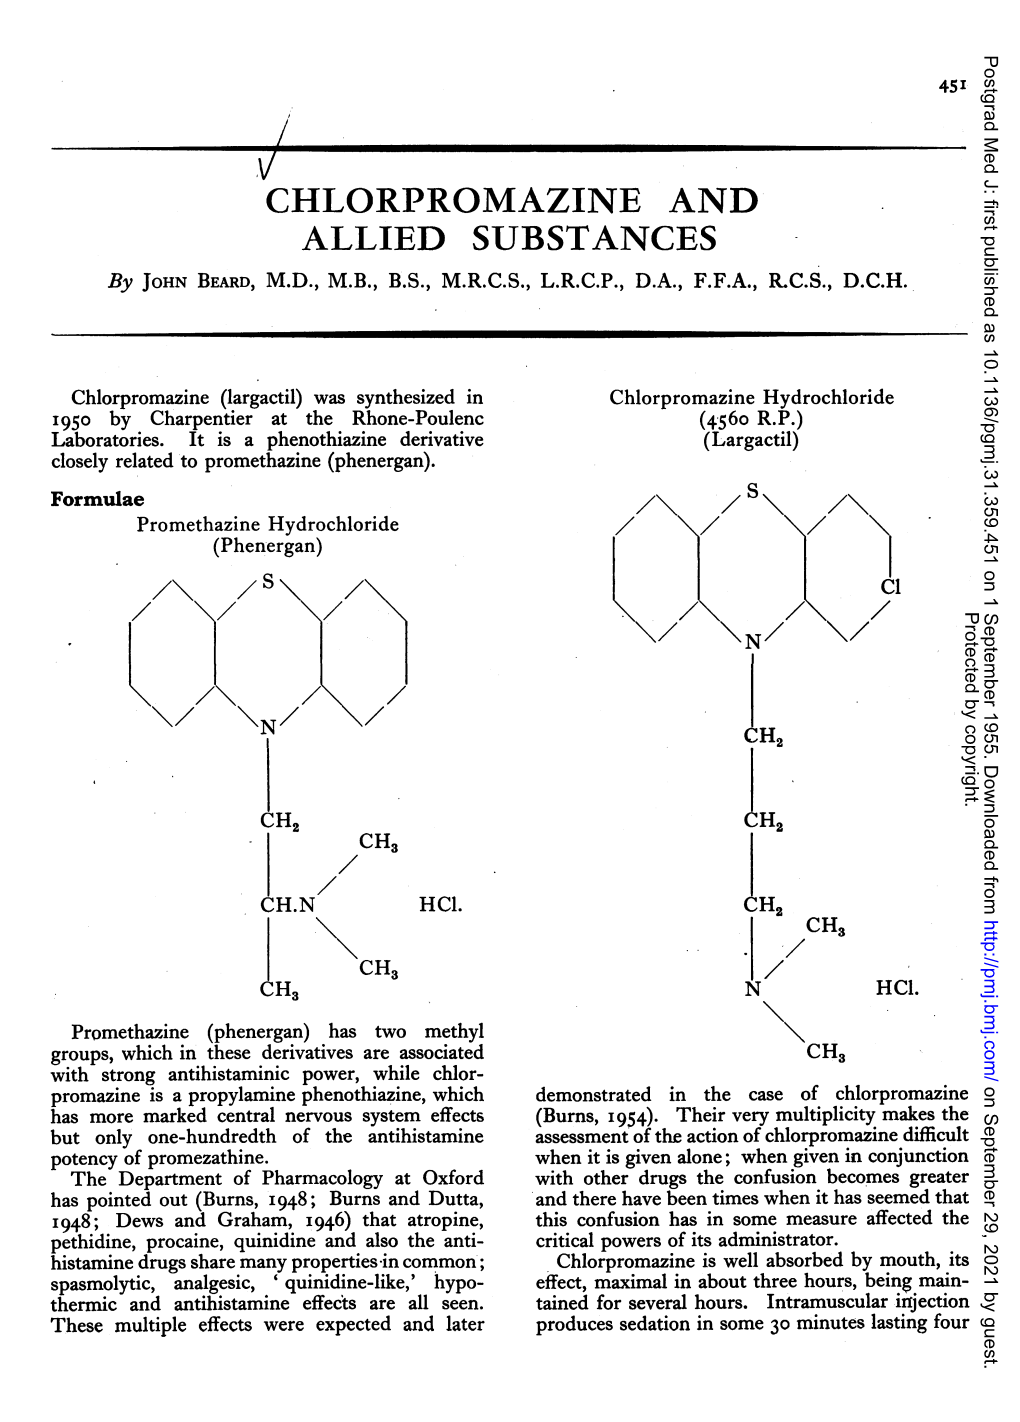 CHLORPROMAZINE and ALLIED SUBSTANCES by JOHN BEARD, M.D., M.B., B.S., M.R.C.S., L.R.C.P., D.A., F.F.A., R.C.S., D.C.H